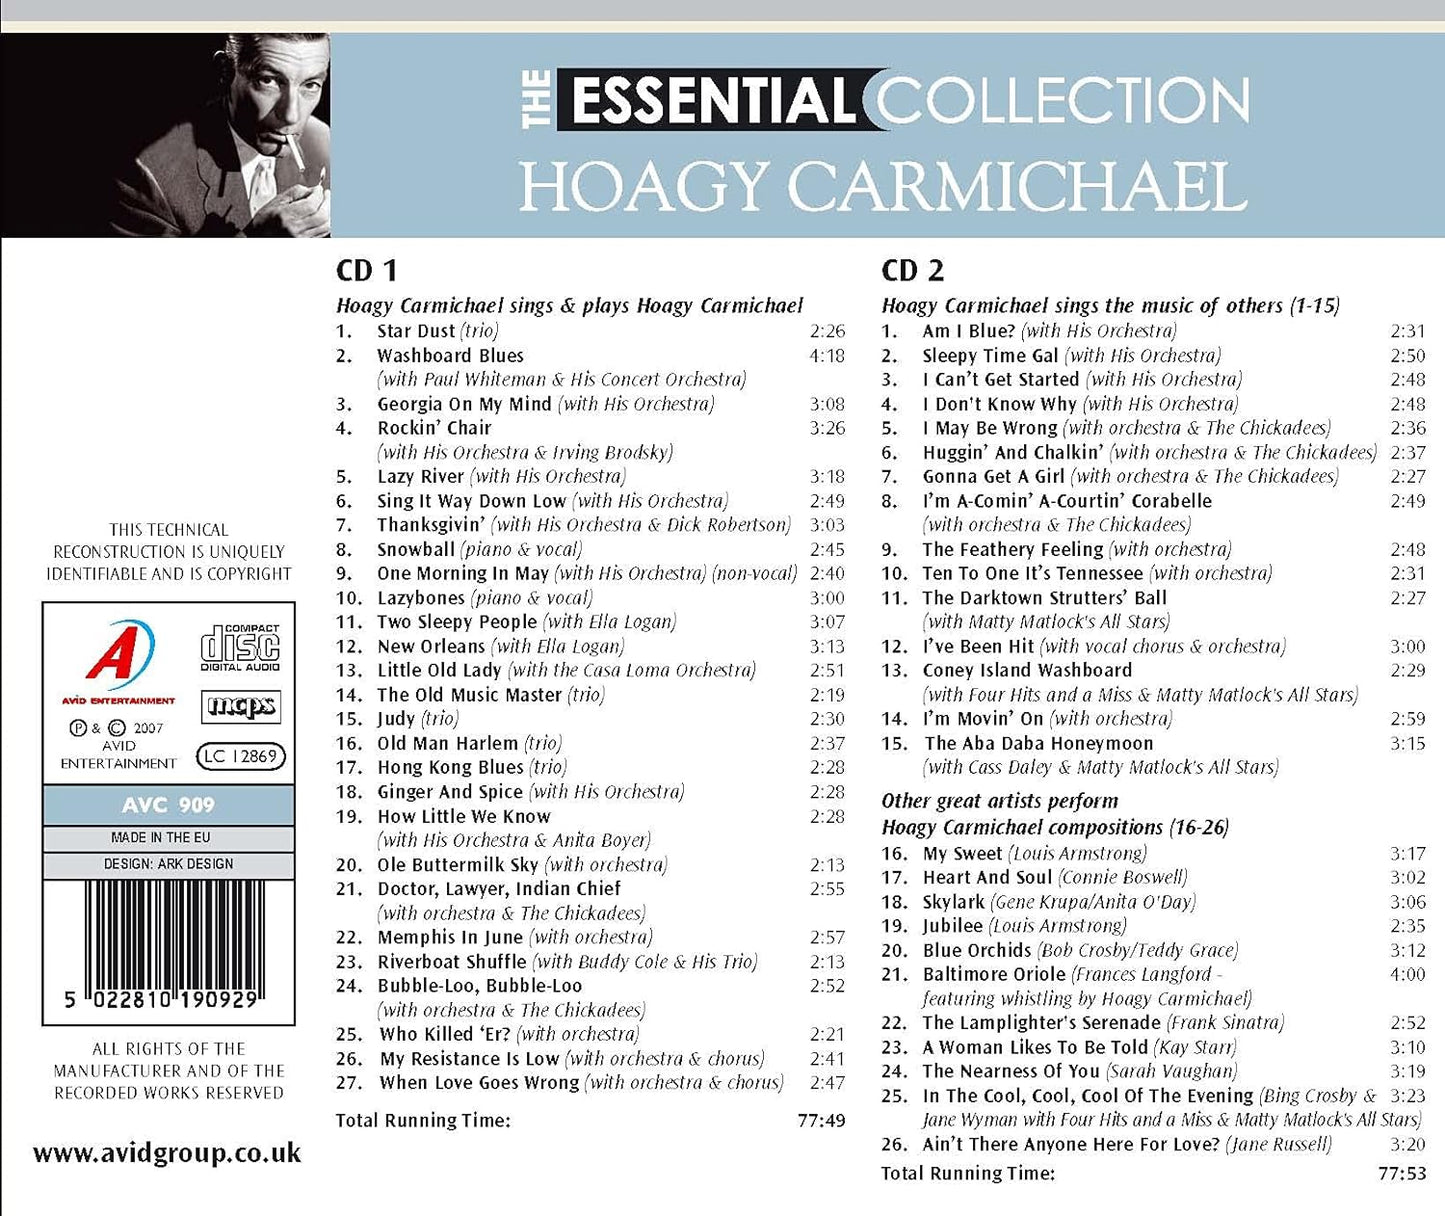 HOAGY CARMICHAEL - The Essential Collection (2 CDs)